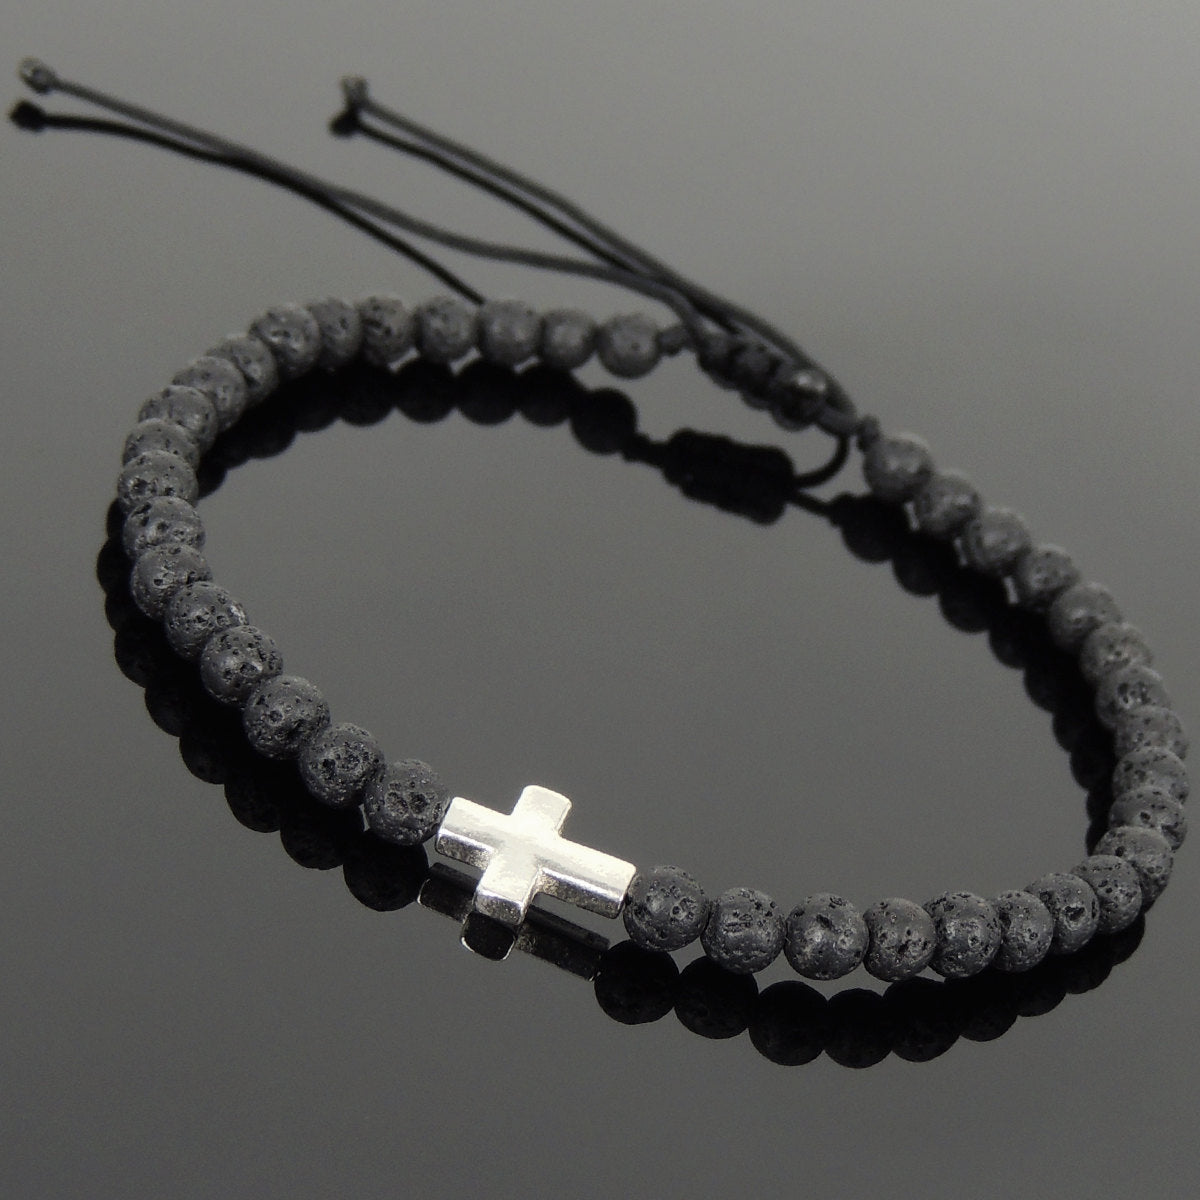 4mm Lava Rock Stone Adjustable Braided Bracelet with S925 Sterling Silver Holy Cross Charm - Handmade by Gem & Silver BR1065